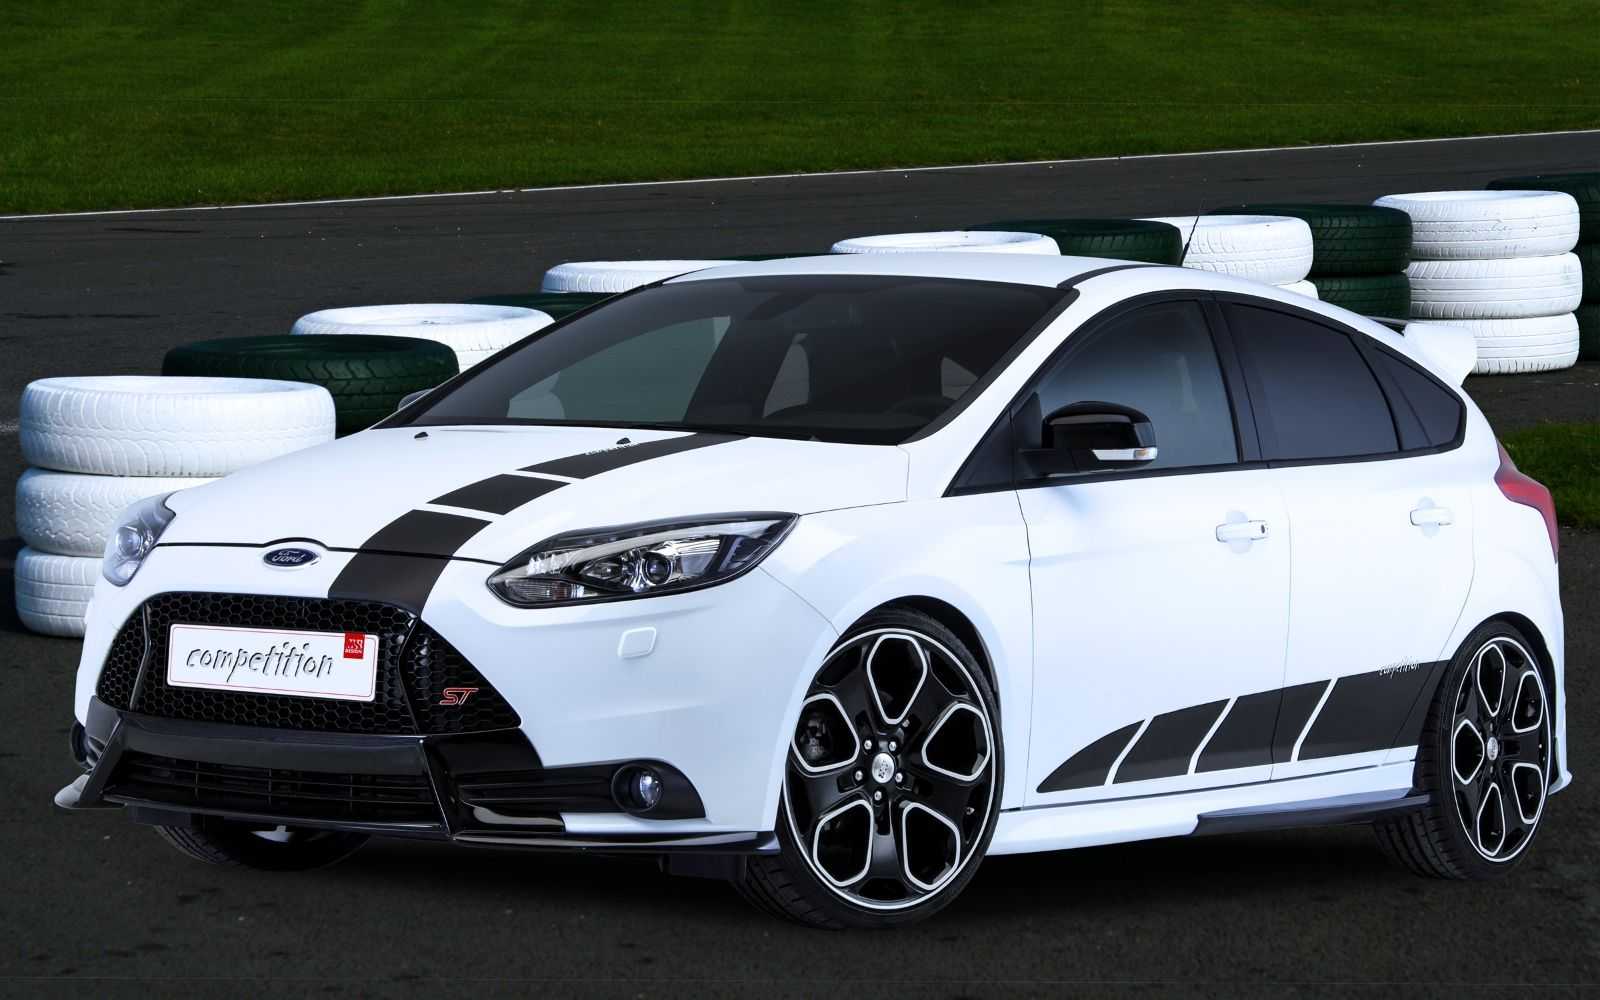 Ford Focus 2014 Tuning